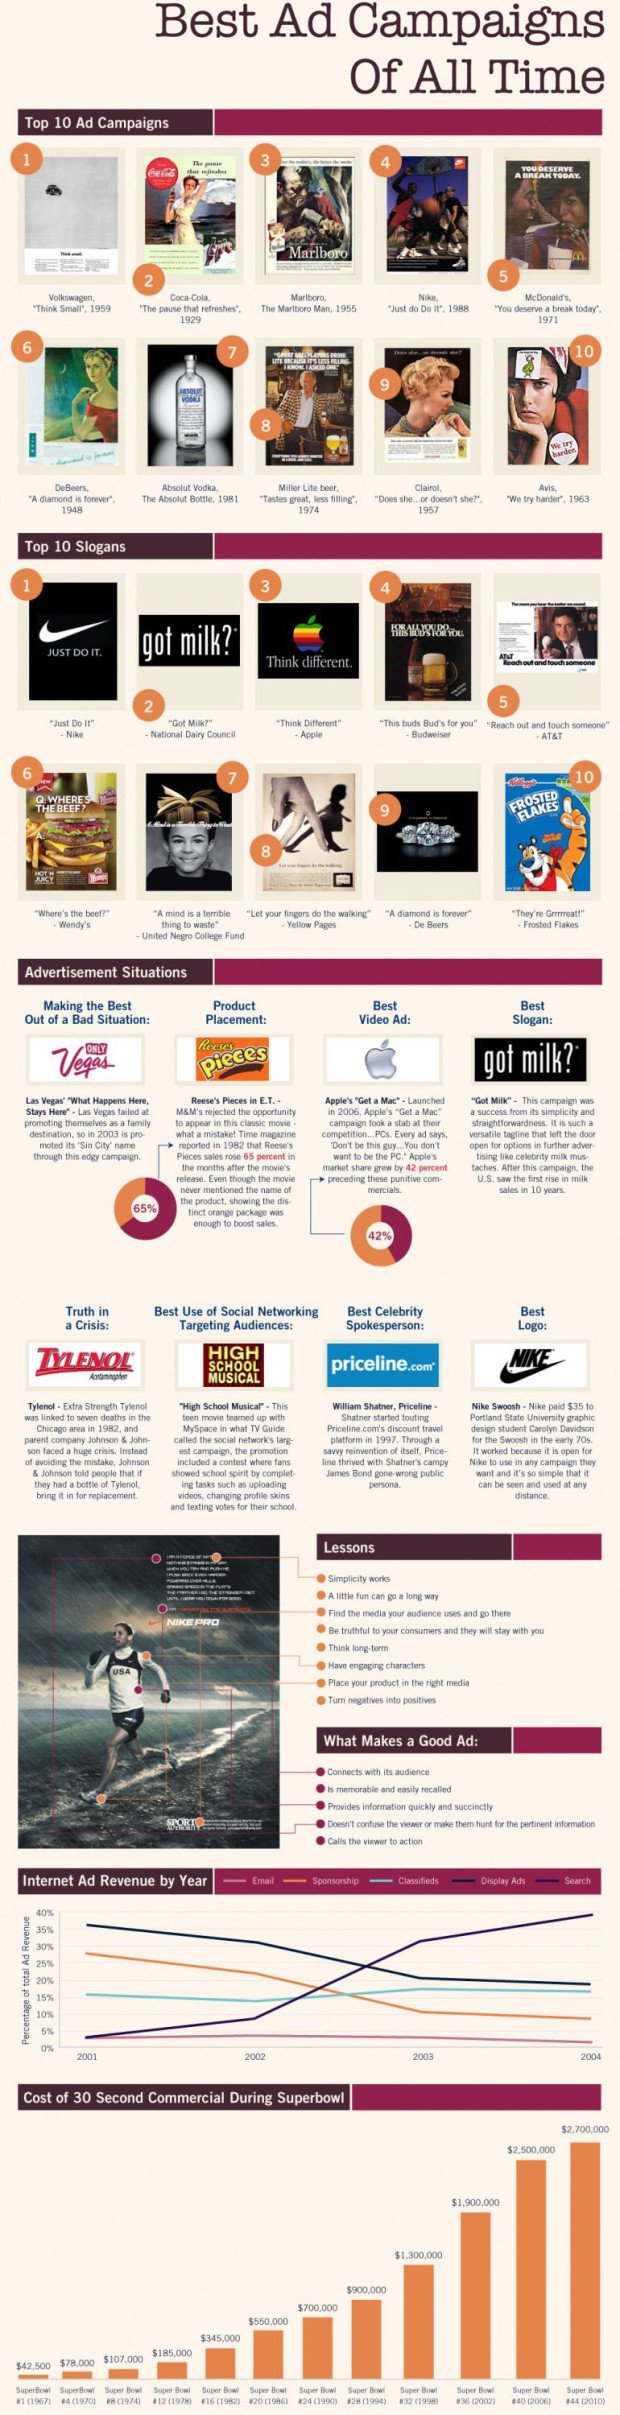 best-ad-campaigns-slogans-infographic